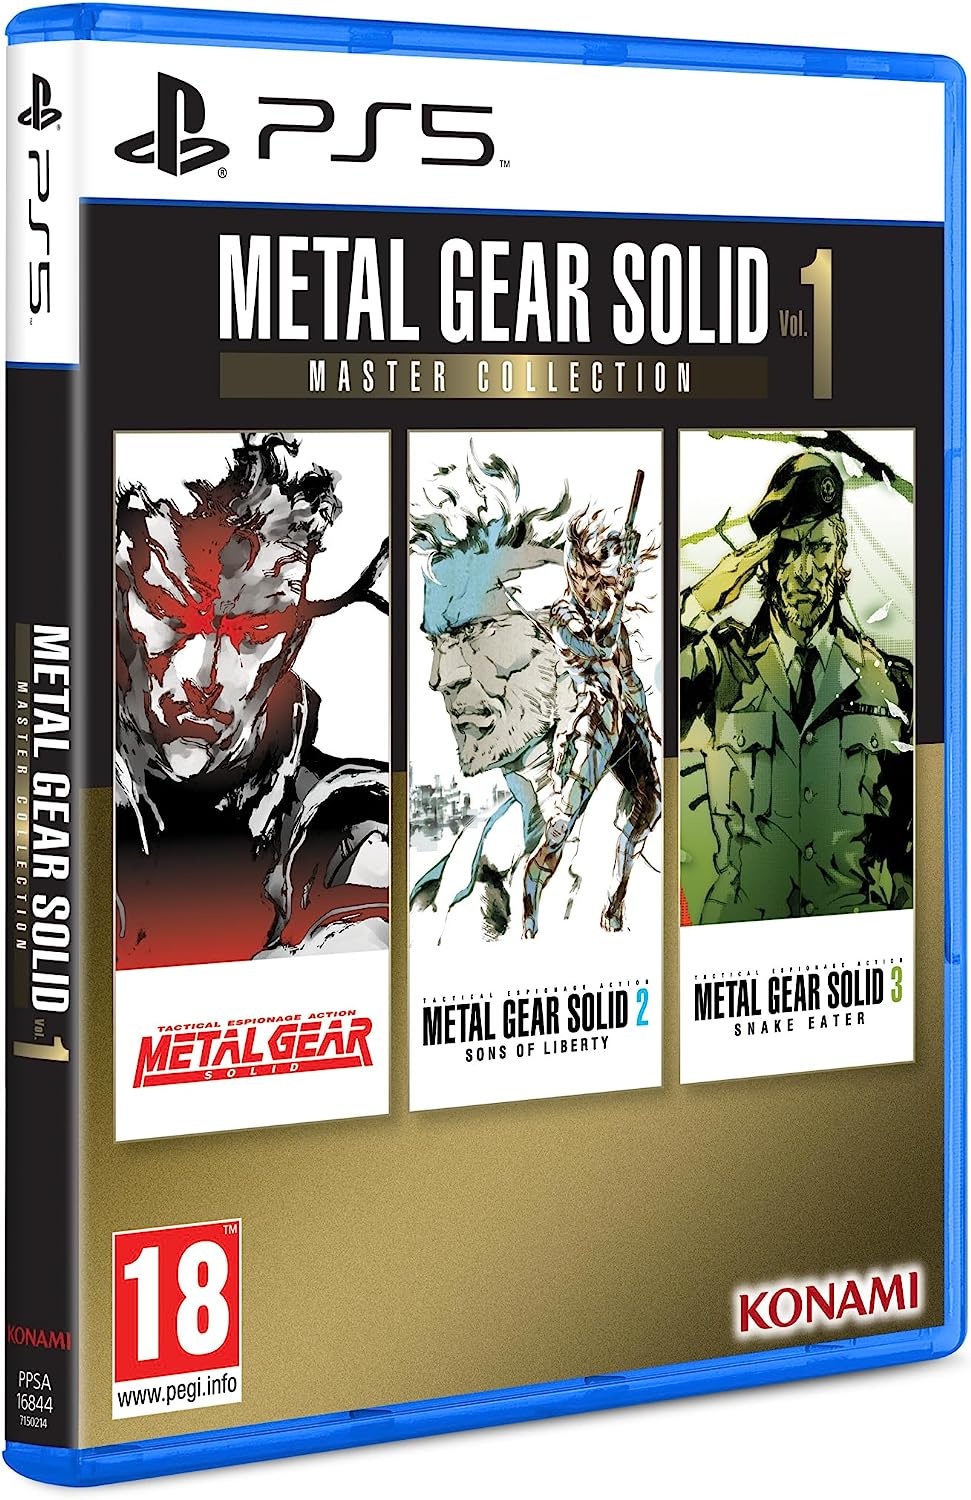 Metal Gear Solid: Master Collection Vol.1 (輸入版) - PS5 | 輸入 